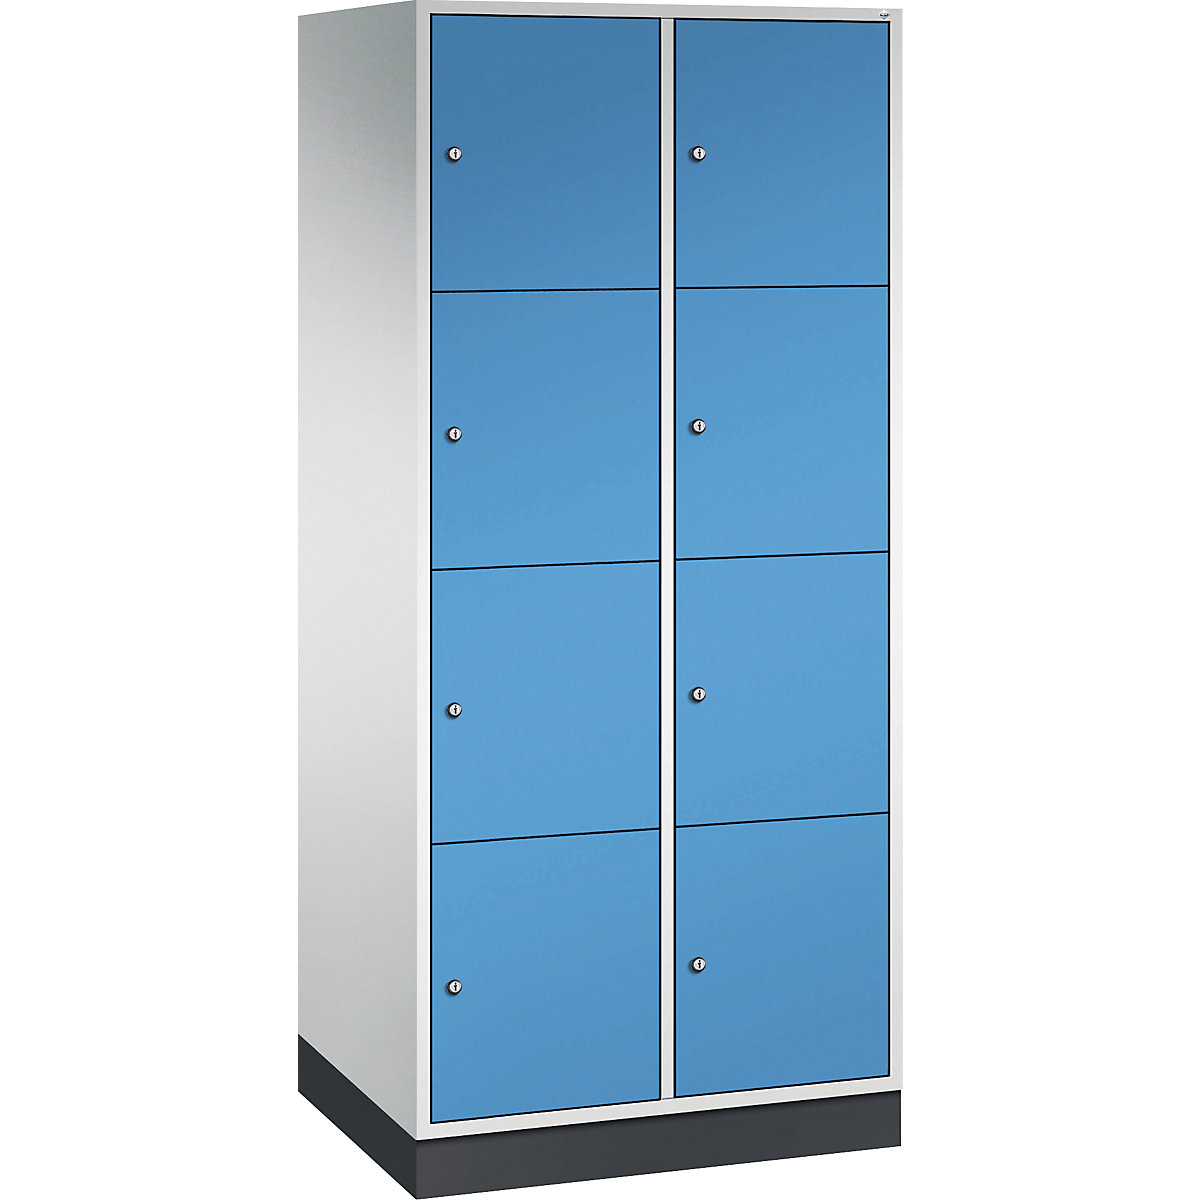 INTRO steel compartment locker, compartment height 435 mm – C+P, WxD 820 x 600 mm, 8 compartments, light grey body, light blue doors